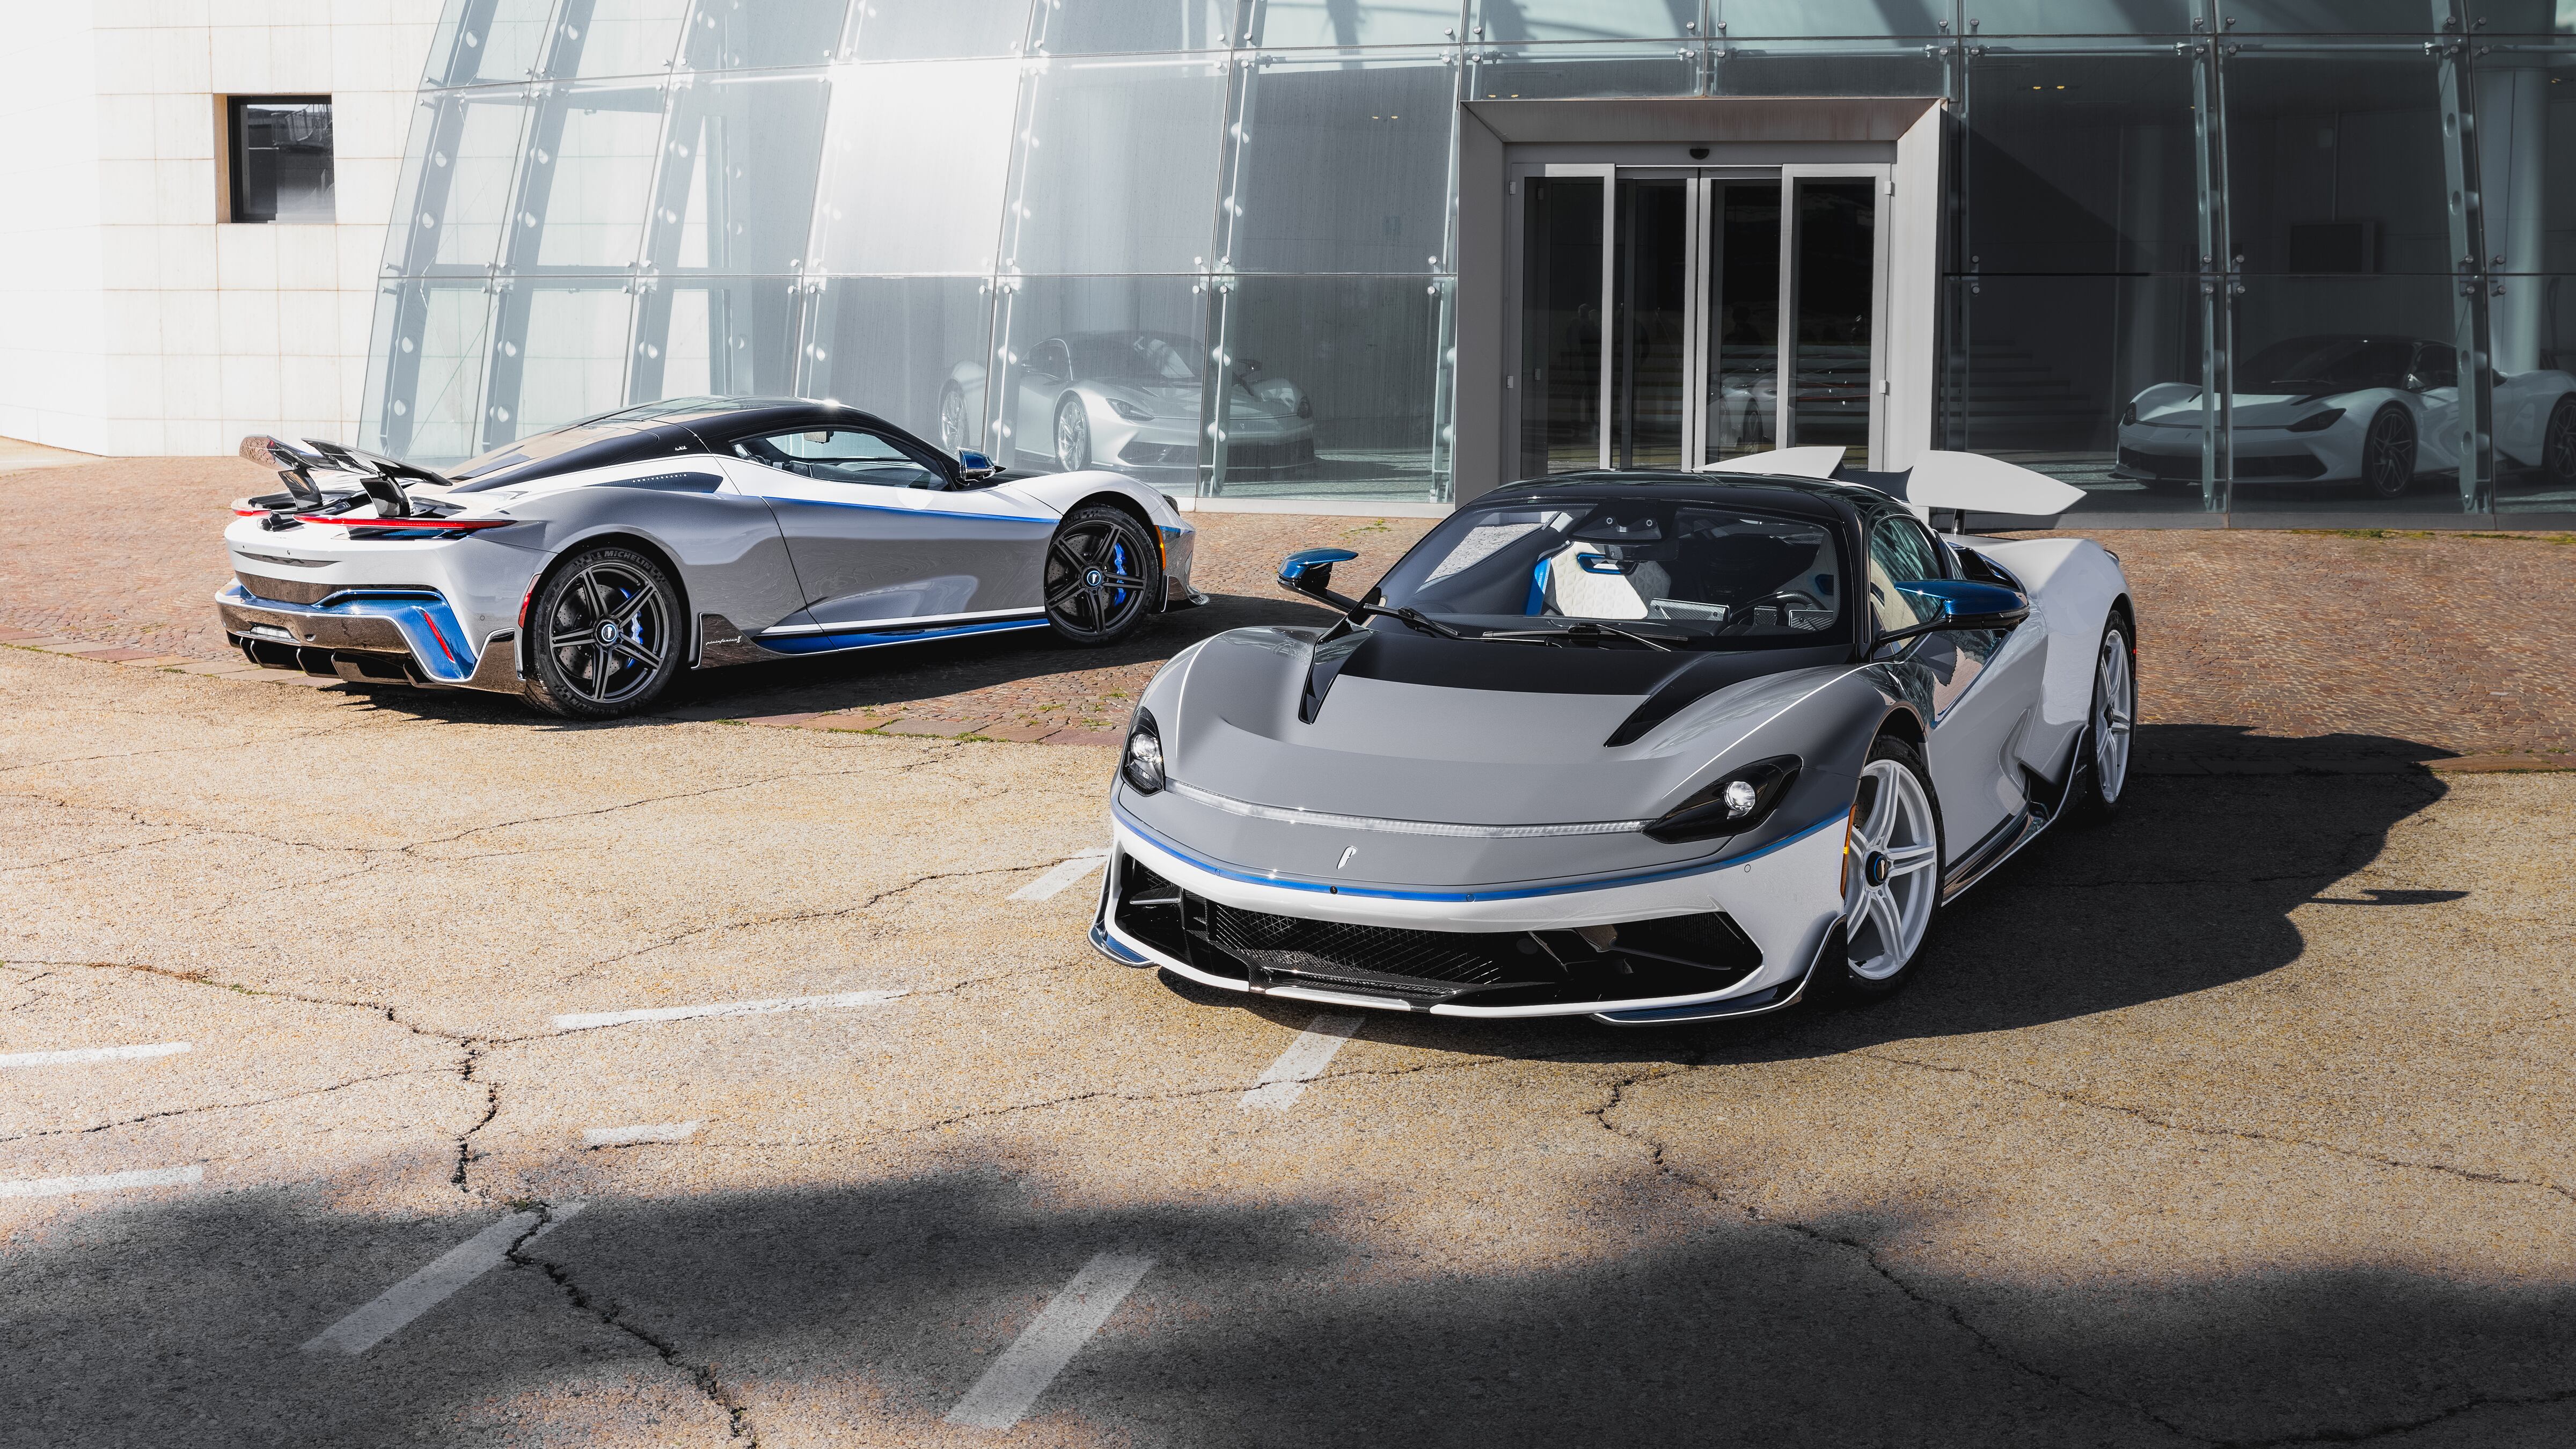 The Reversario will be a one-off creation and is a special edition of the Battista hypercard. (Credit: Pininfarina Automobili)